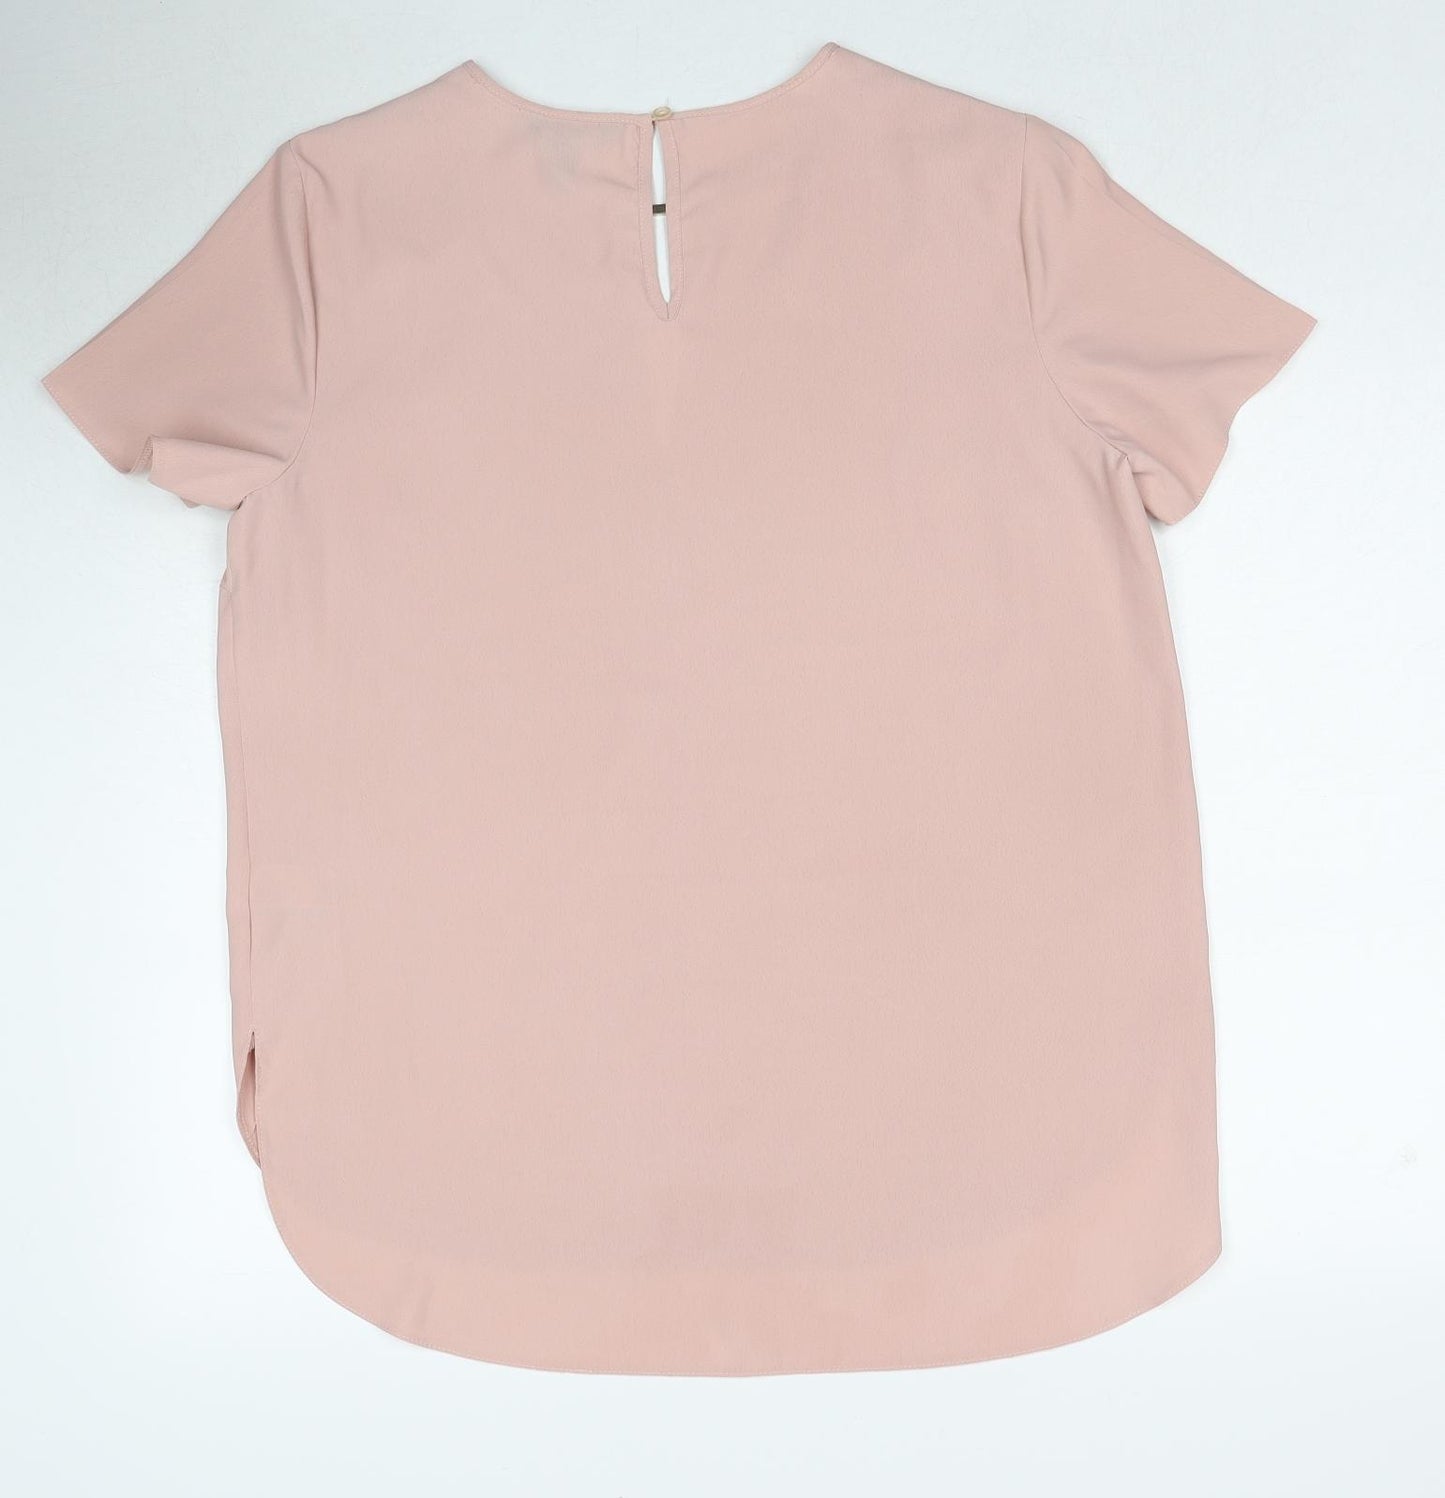 New Look Womens Pink Polyester Basic T-Shirt Size 16 Round Neck - Keyhole neck